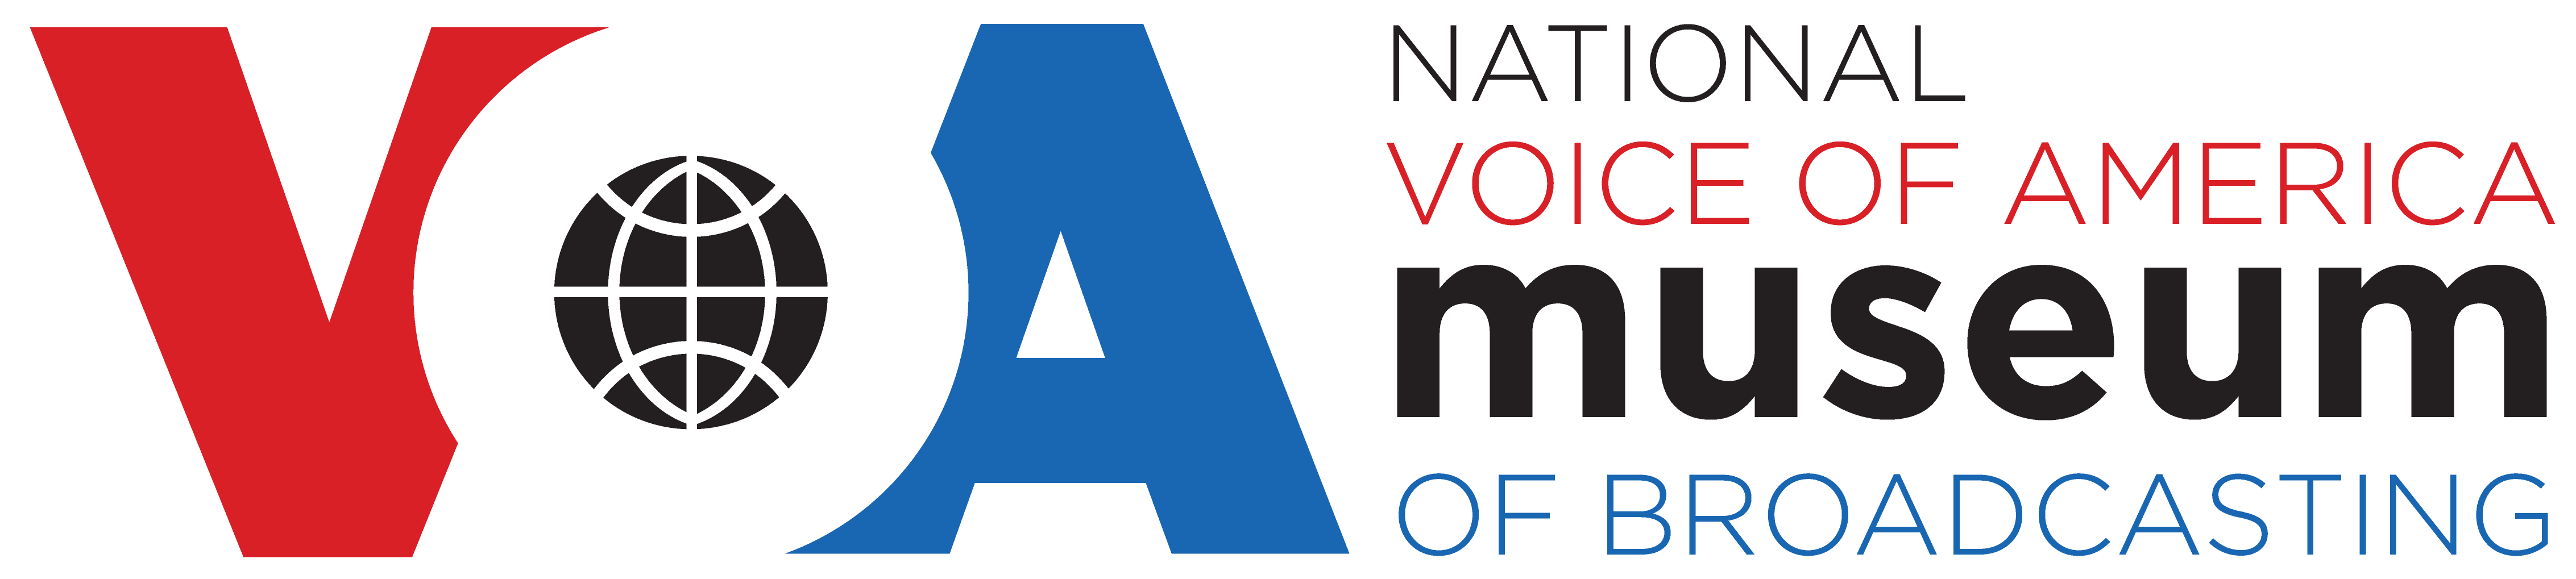 National Voice of America Museum of Broadcasting How VOA changed the